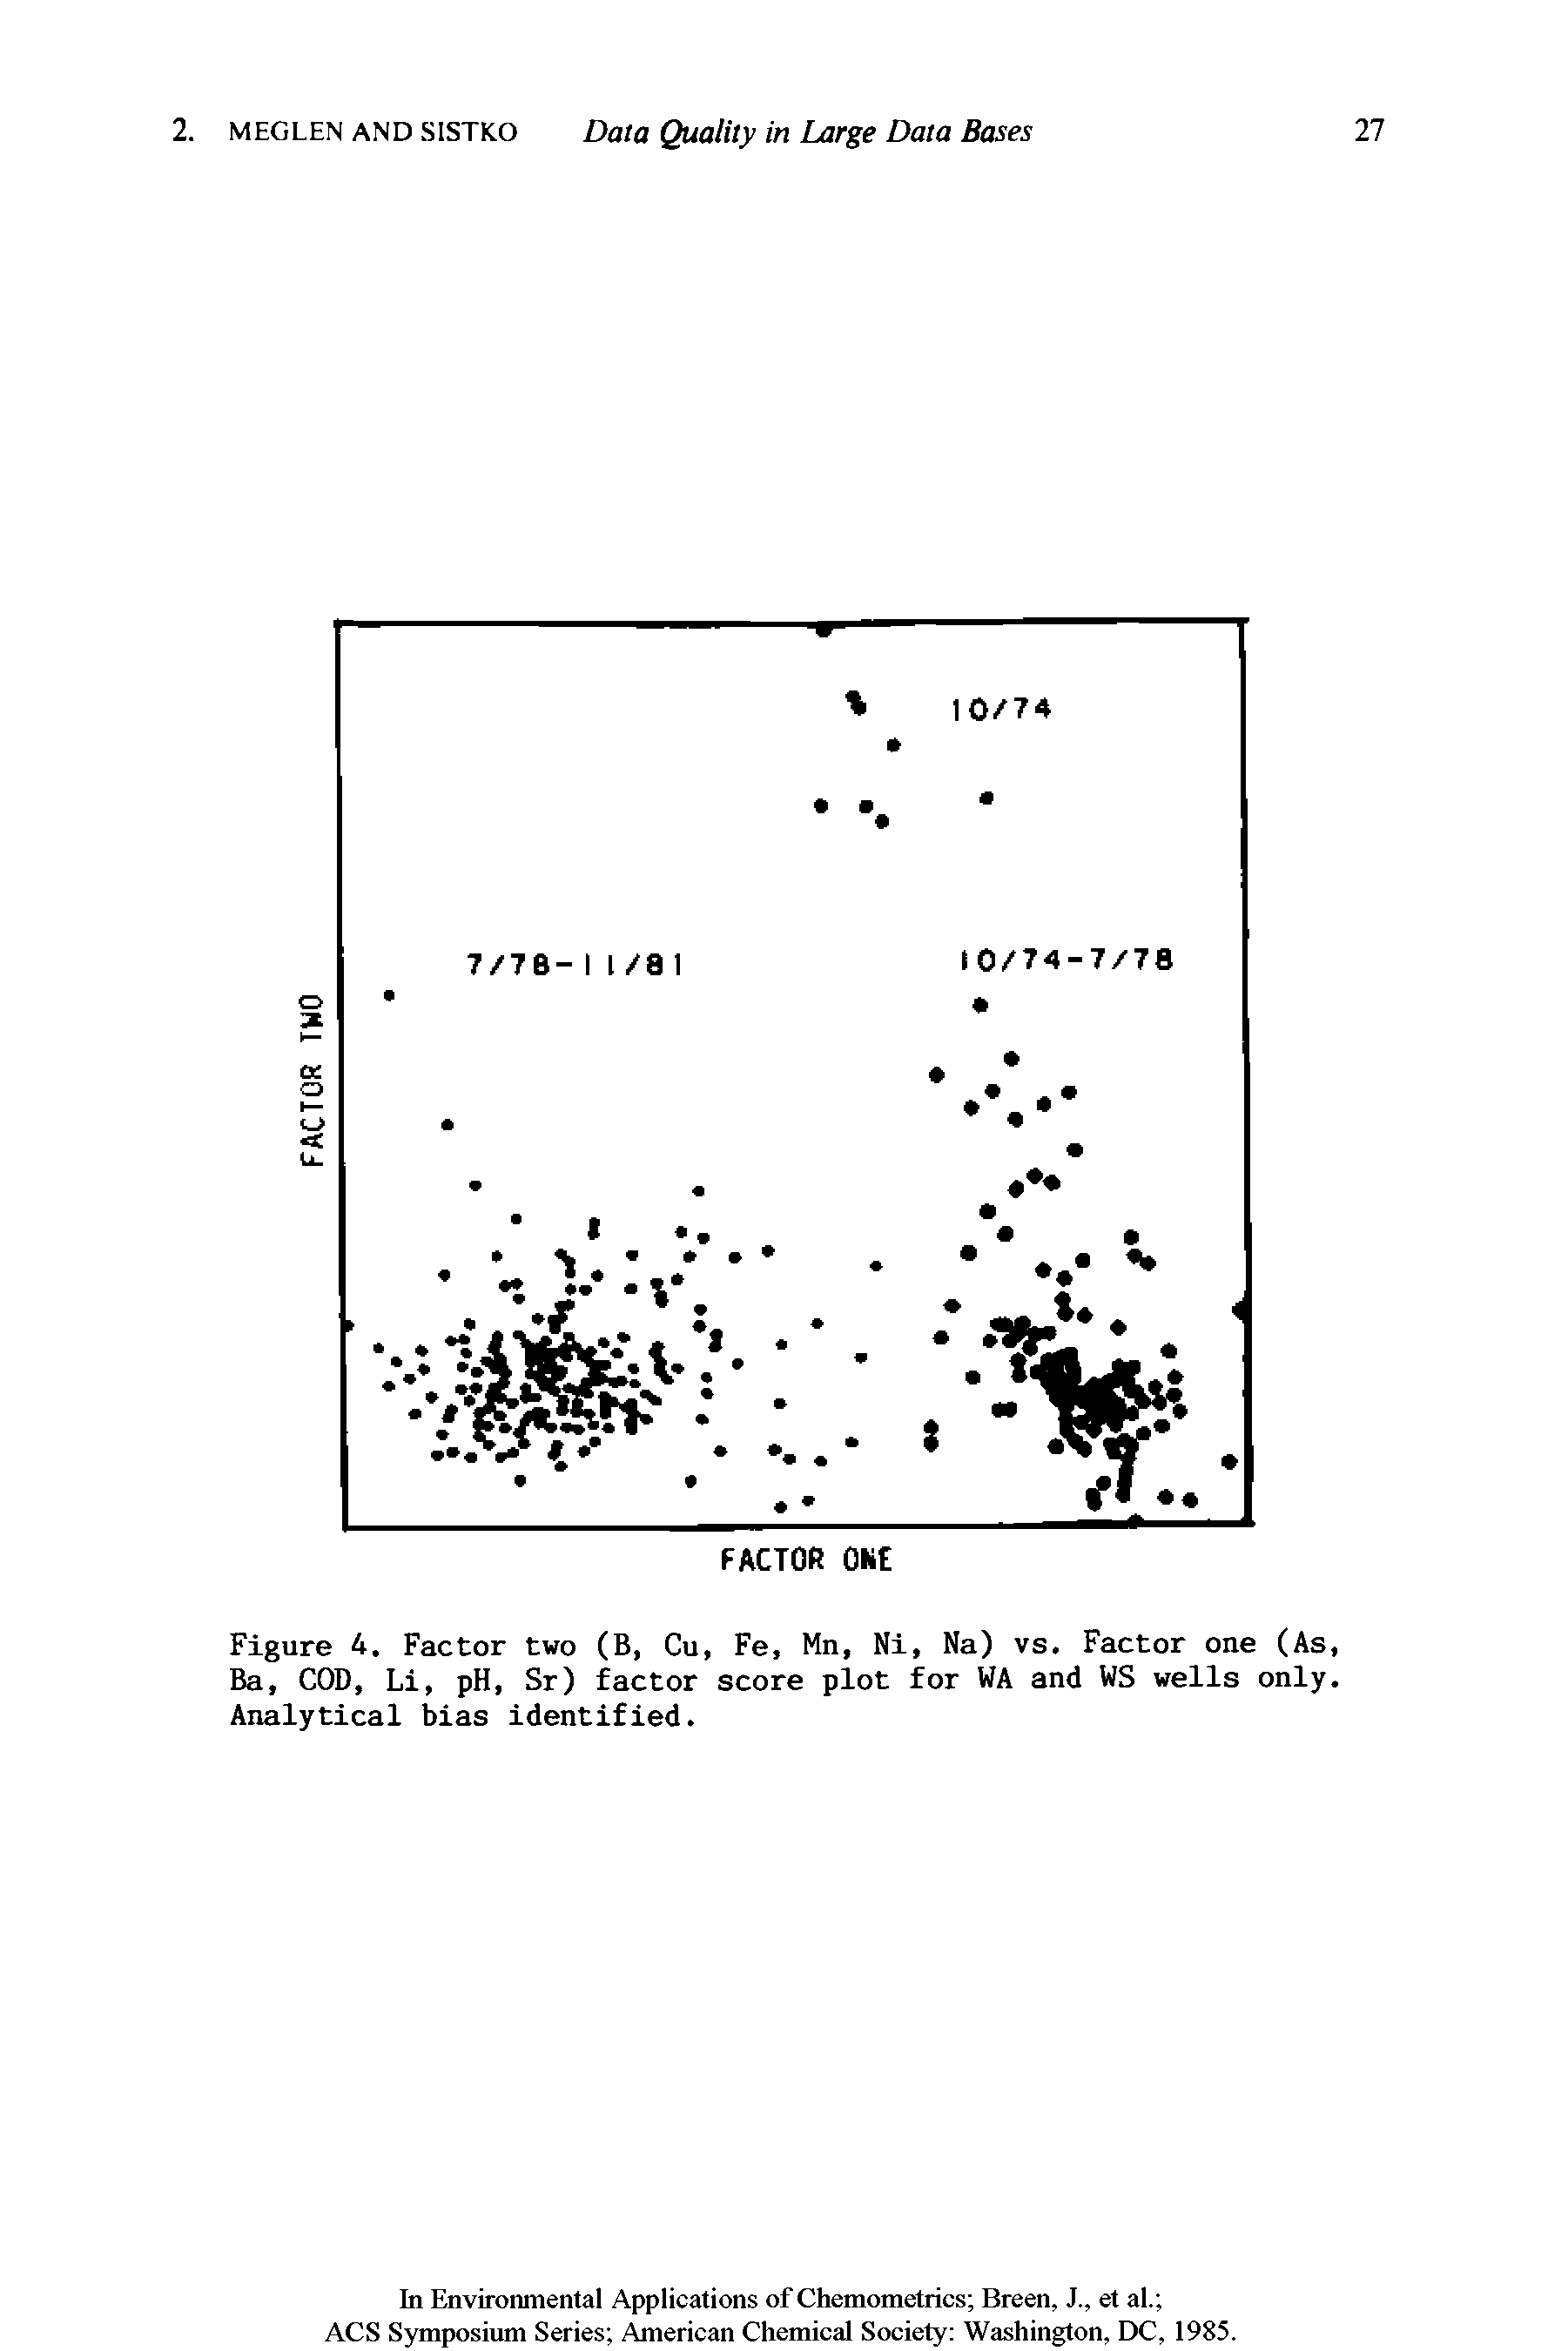 Figure 4. Factor two (B, Cu, Fe, Mn, Ni, Na) vs. Factor one (As, Ba, COD, Li, pH, Sr) factor score plot for WA and WS wells only. Analytical bias identified.